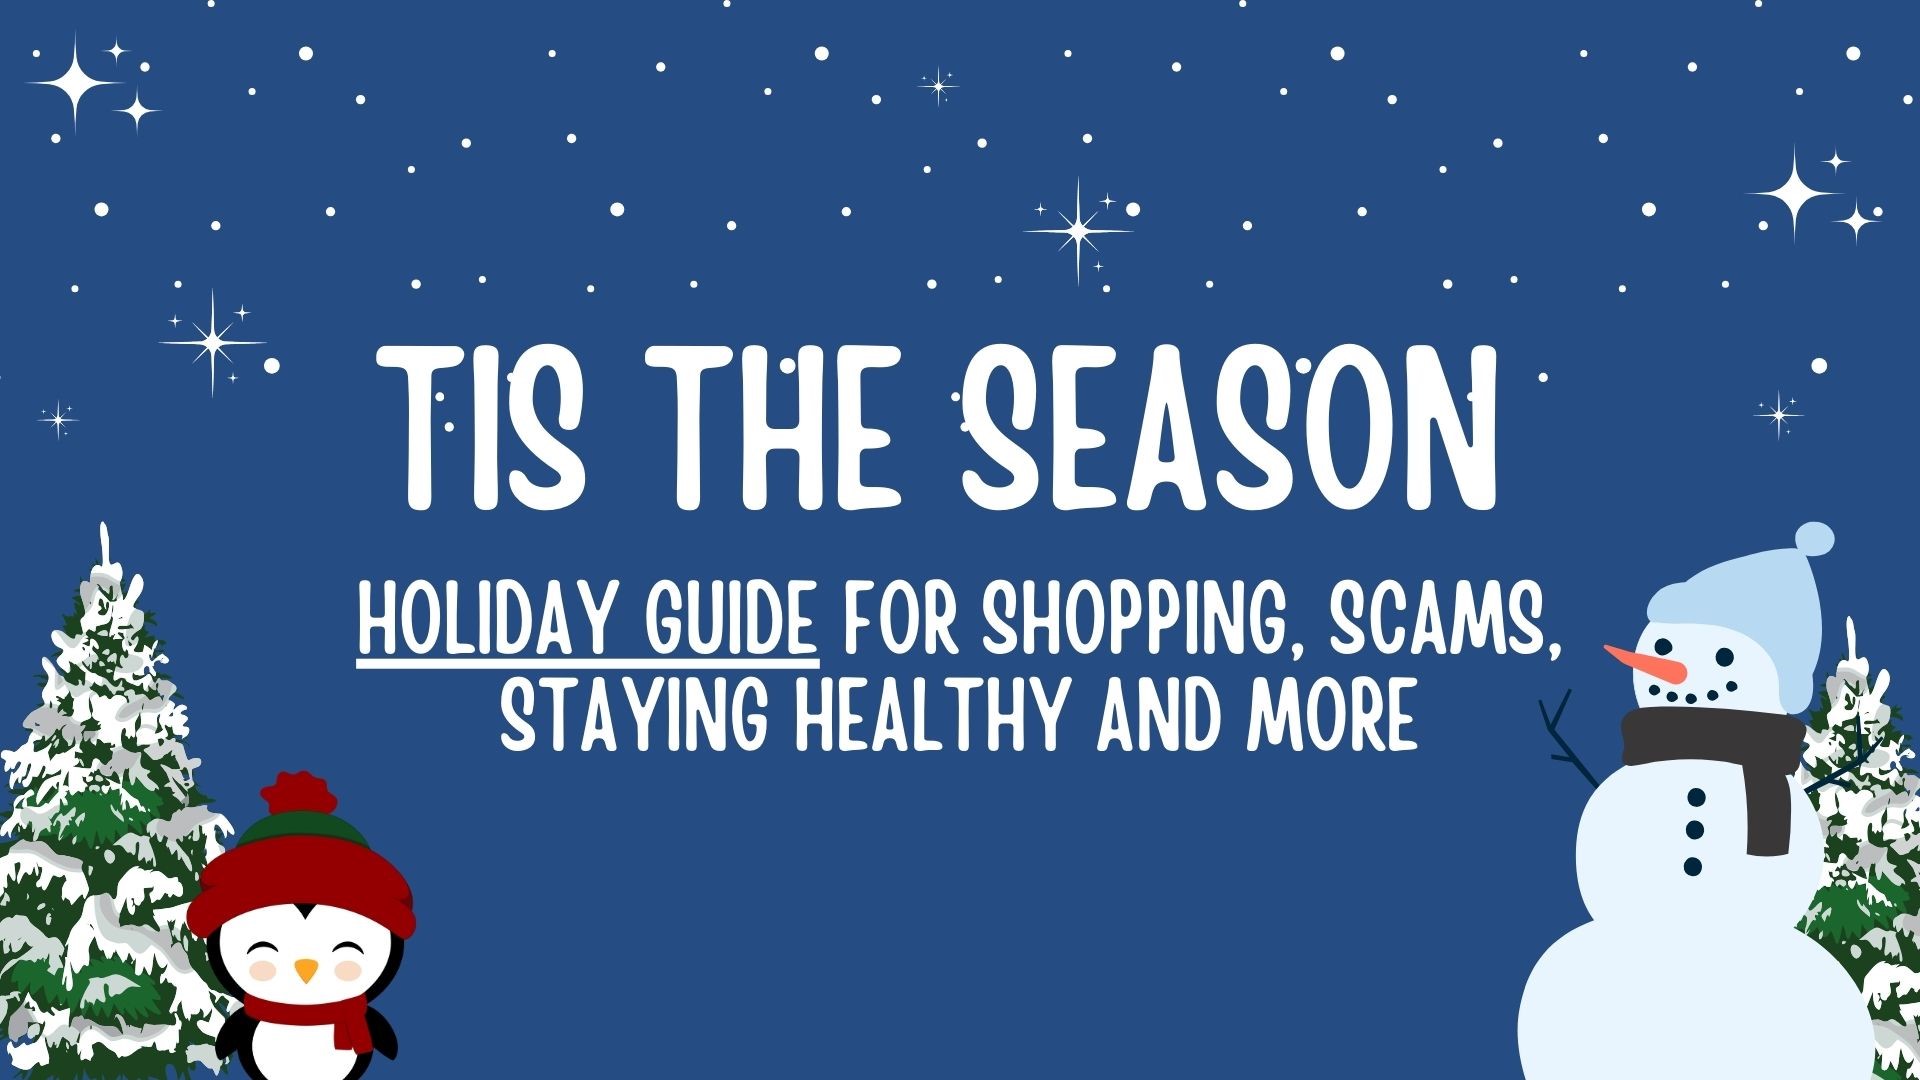 A complete guide to the holiday season. From how to save while shopping to avoid scams and keeping your family healthy. Plus what to know about Hanukkah and Kwanzaa.